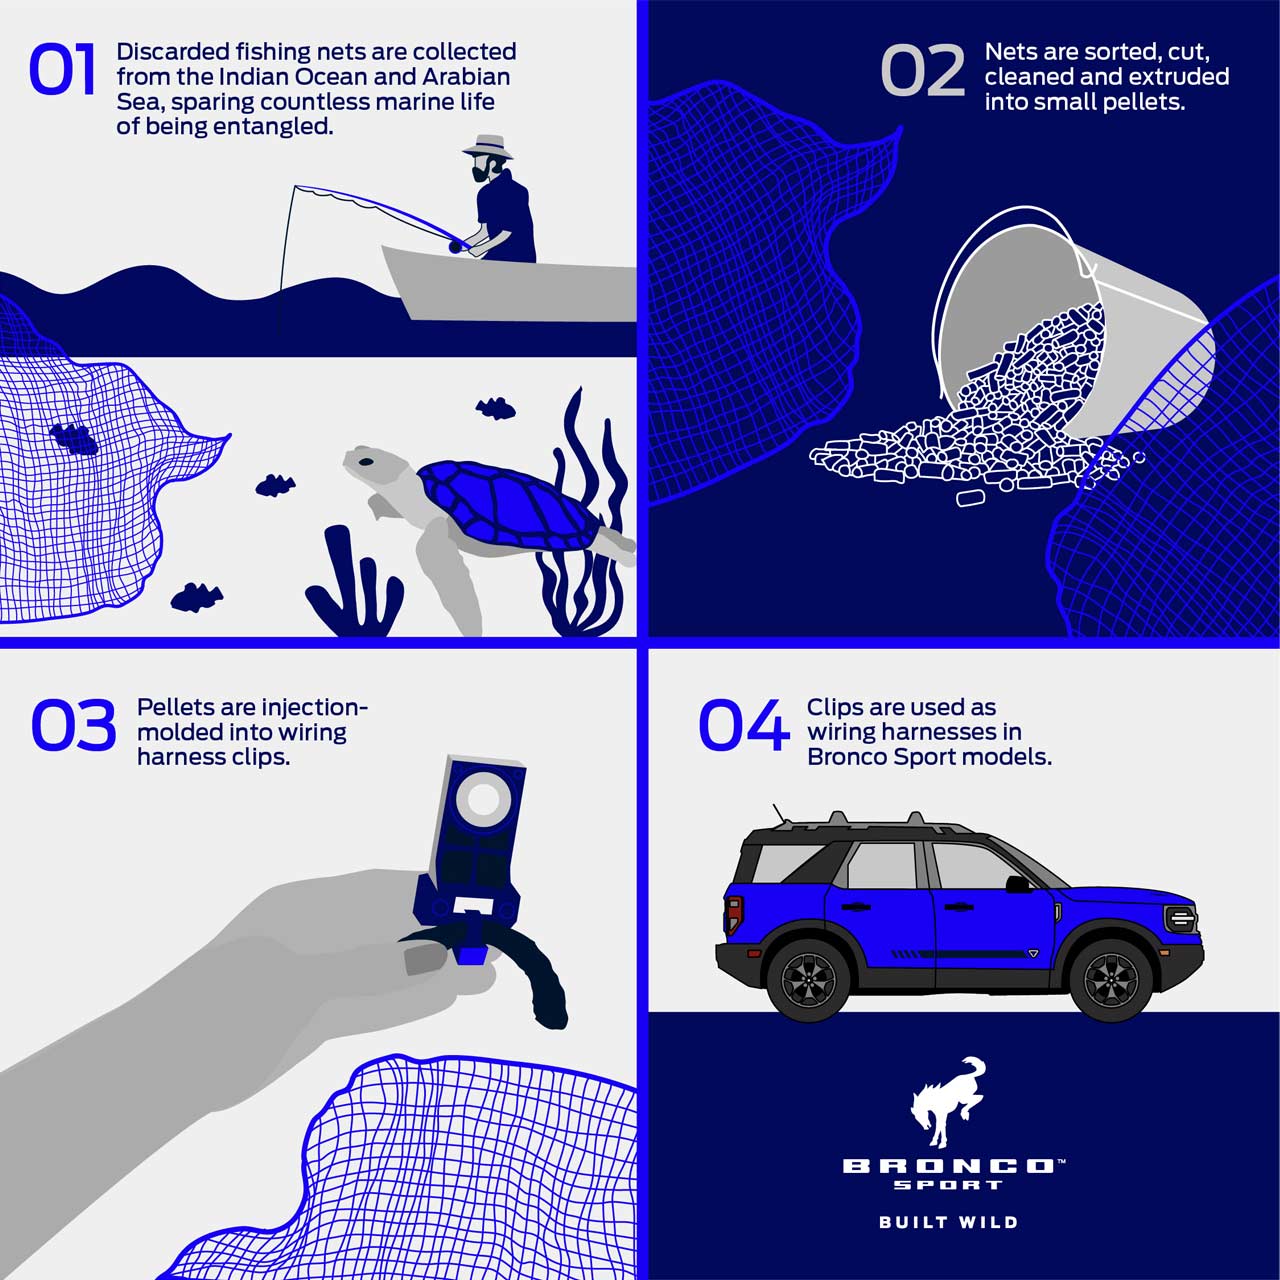 Ford-Bronco-Sport-recycled-wiring-harness-clip_infographic